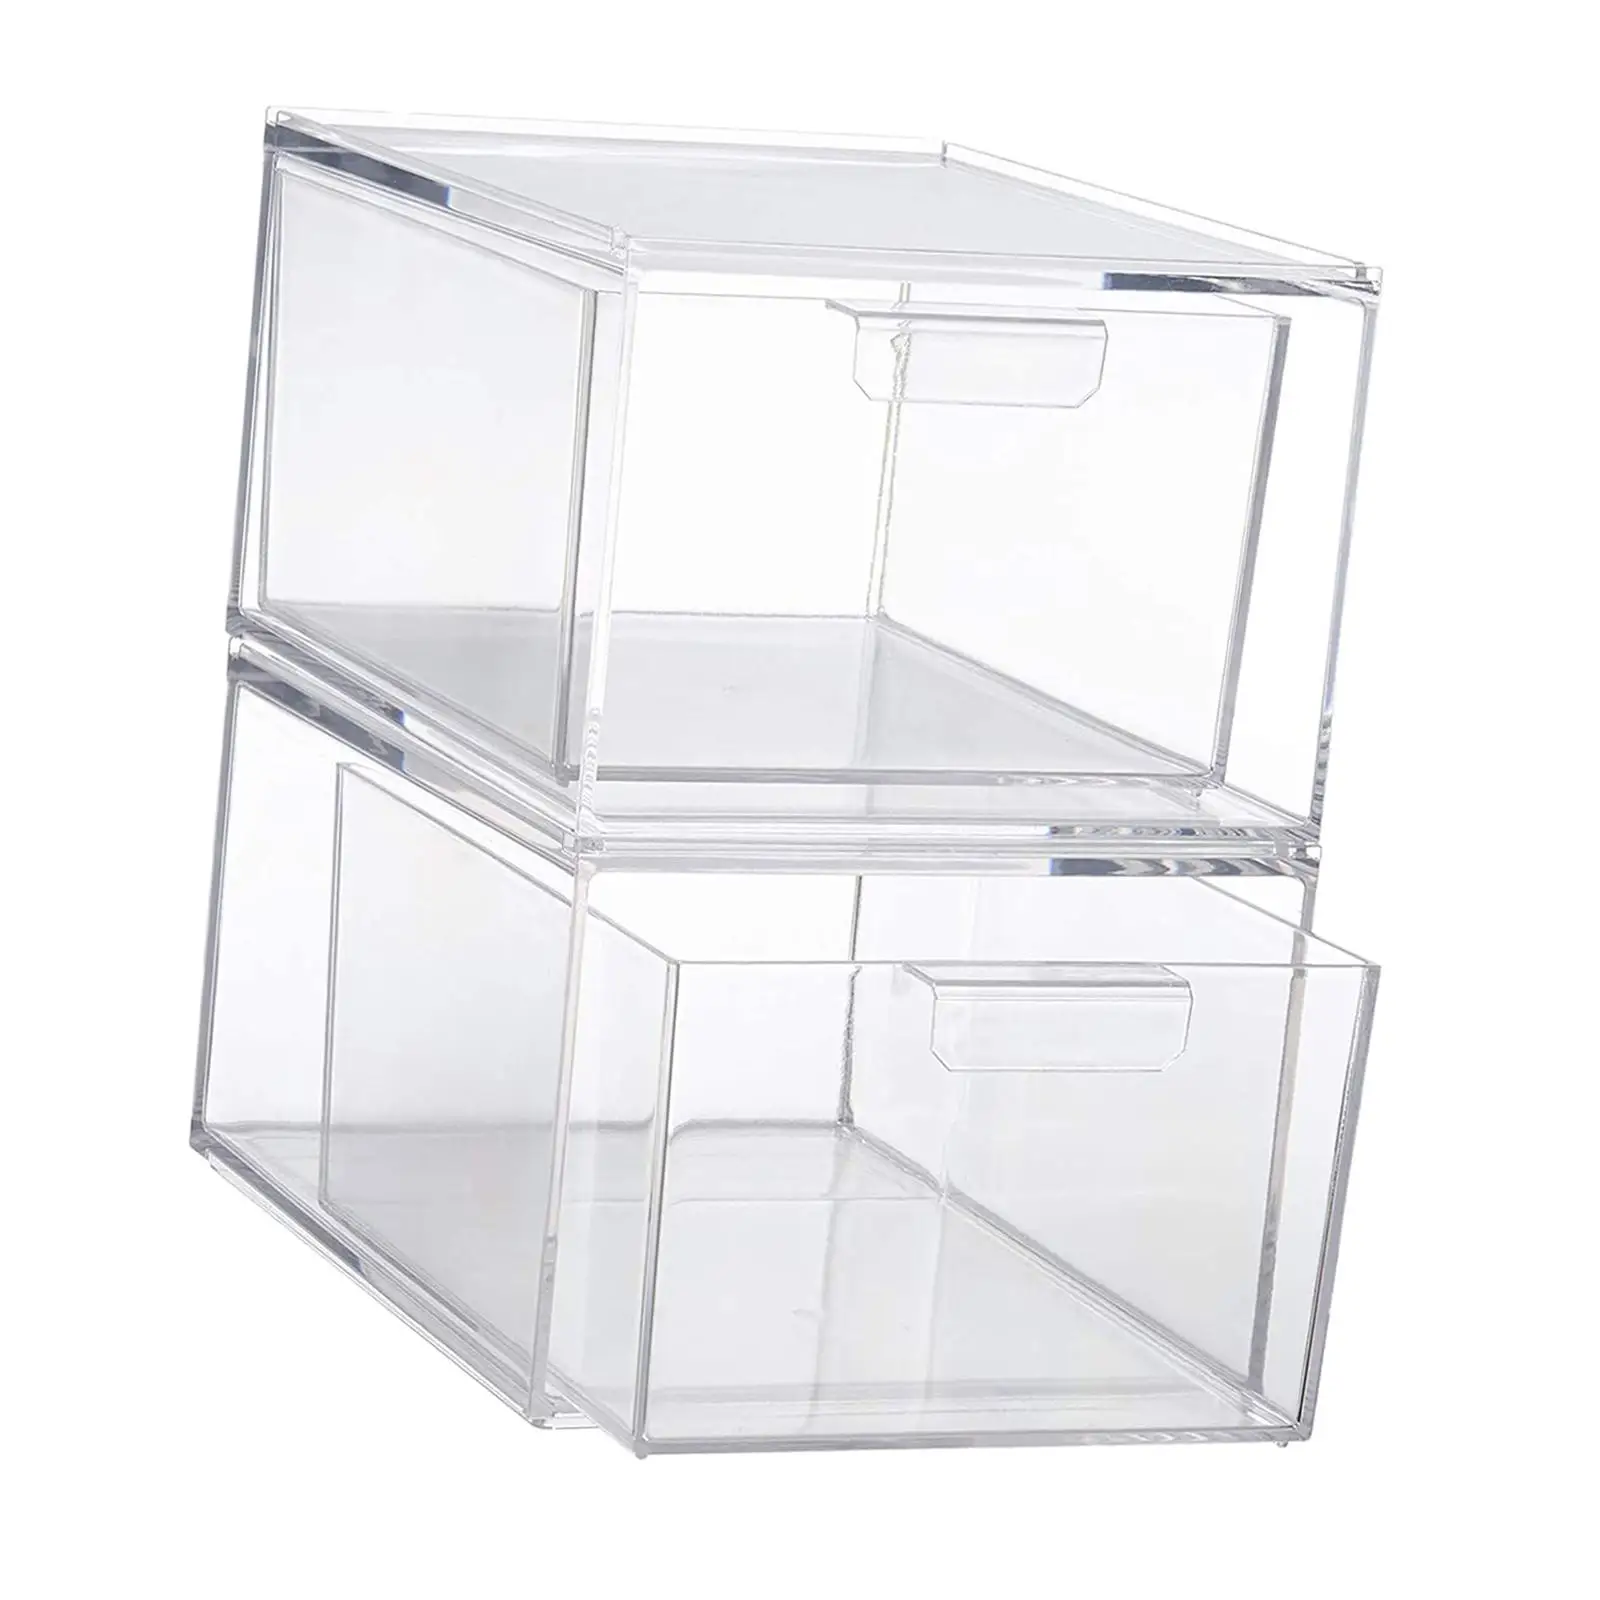 2x Clear Storage Box Organizing Desktop Sundries Container Acrylic Storage Container for Hair Accessories Jewelry Cosmetics